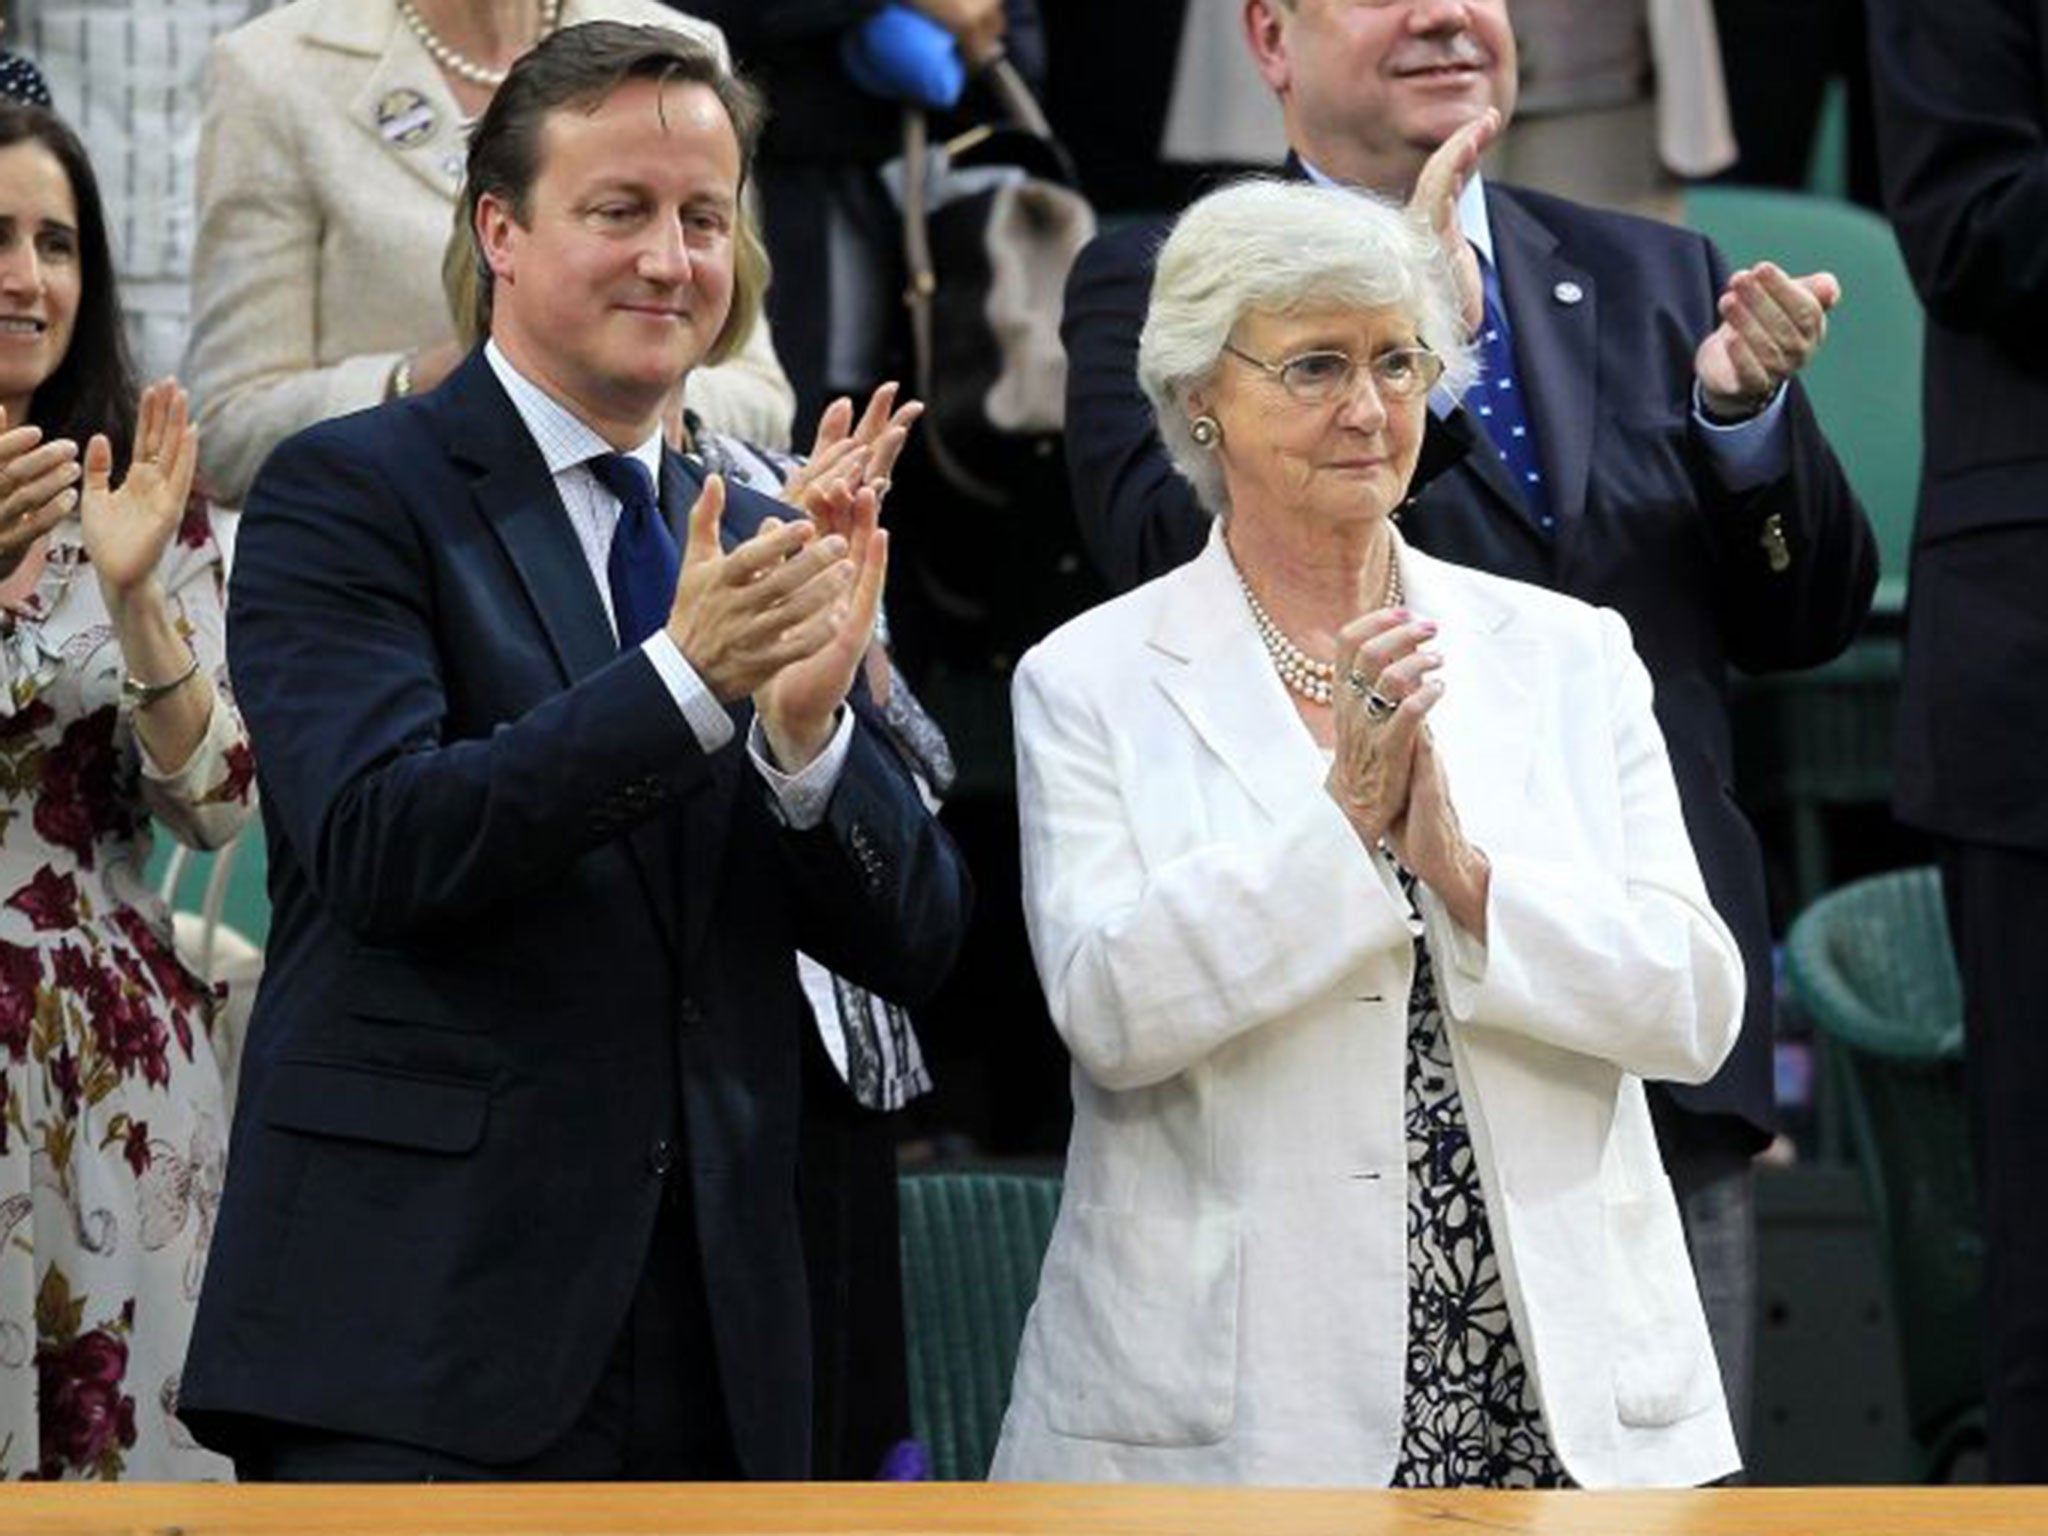 David Cameron with his mother, Mary, attending the tennis at Wimbledon. The PM's mother said she doesn't interfere with her son's work